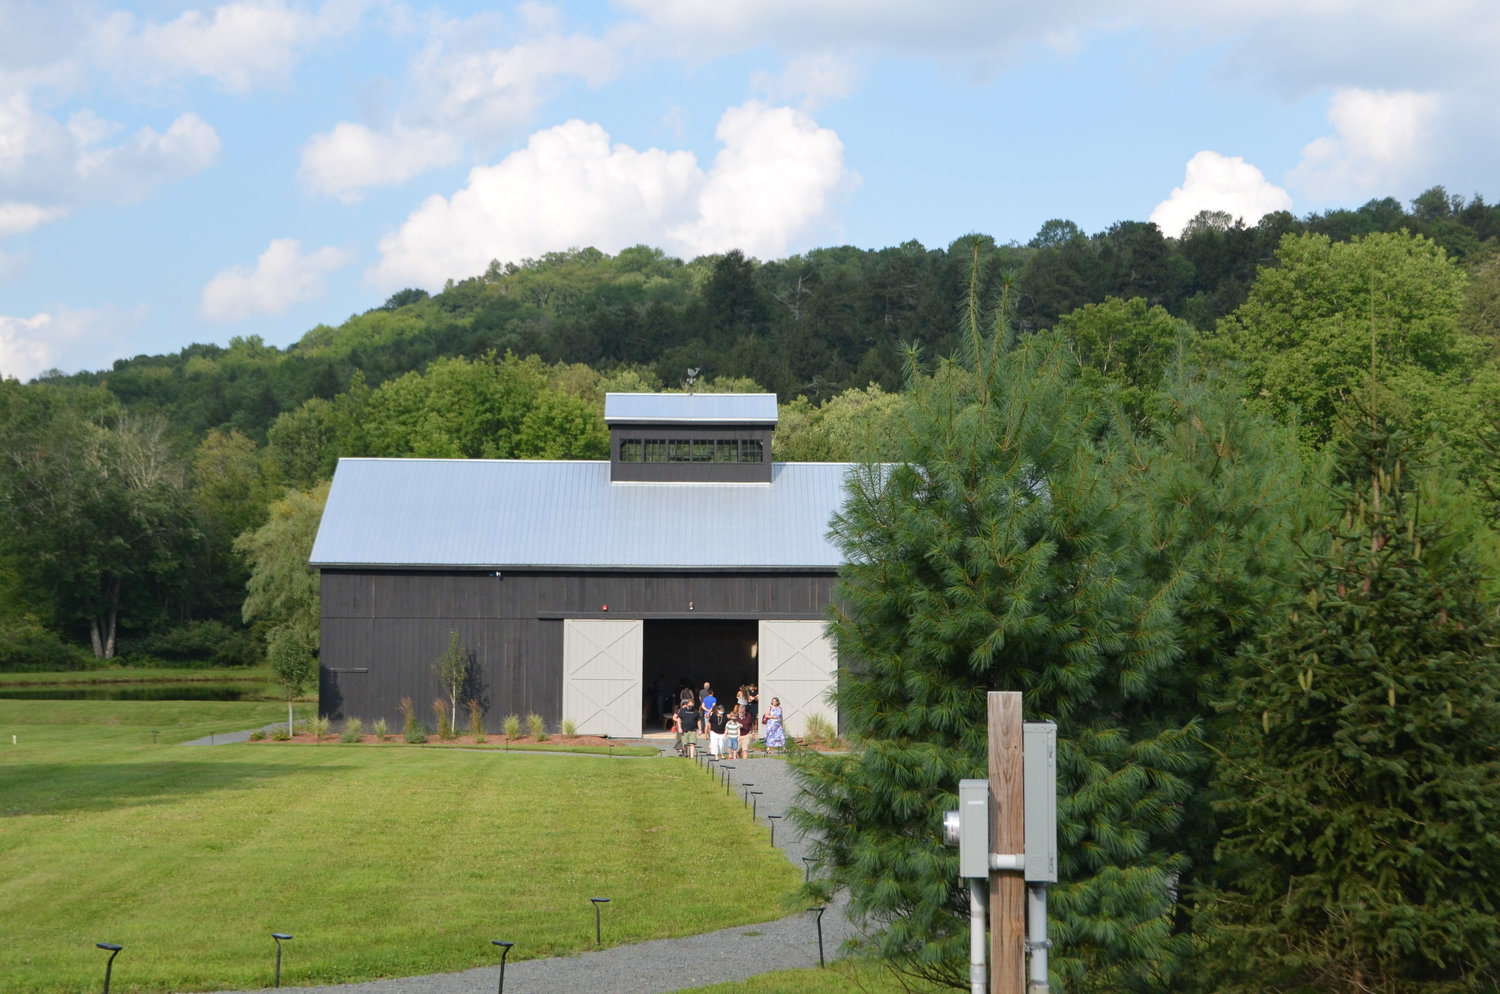 The Haypress Barn at the Callicoon Hills Resort is the Delaware Valley Opera's summer home.